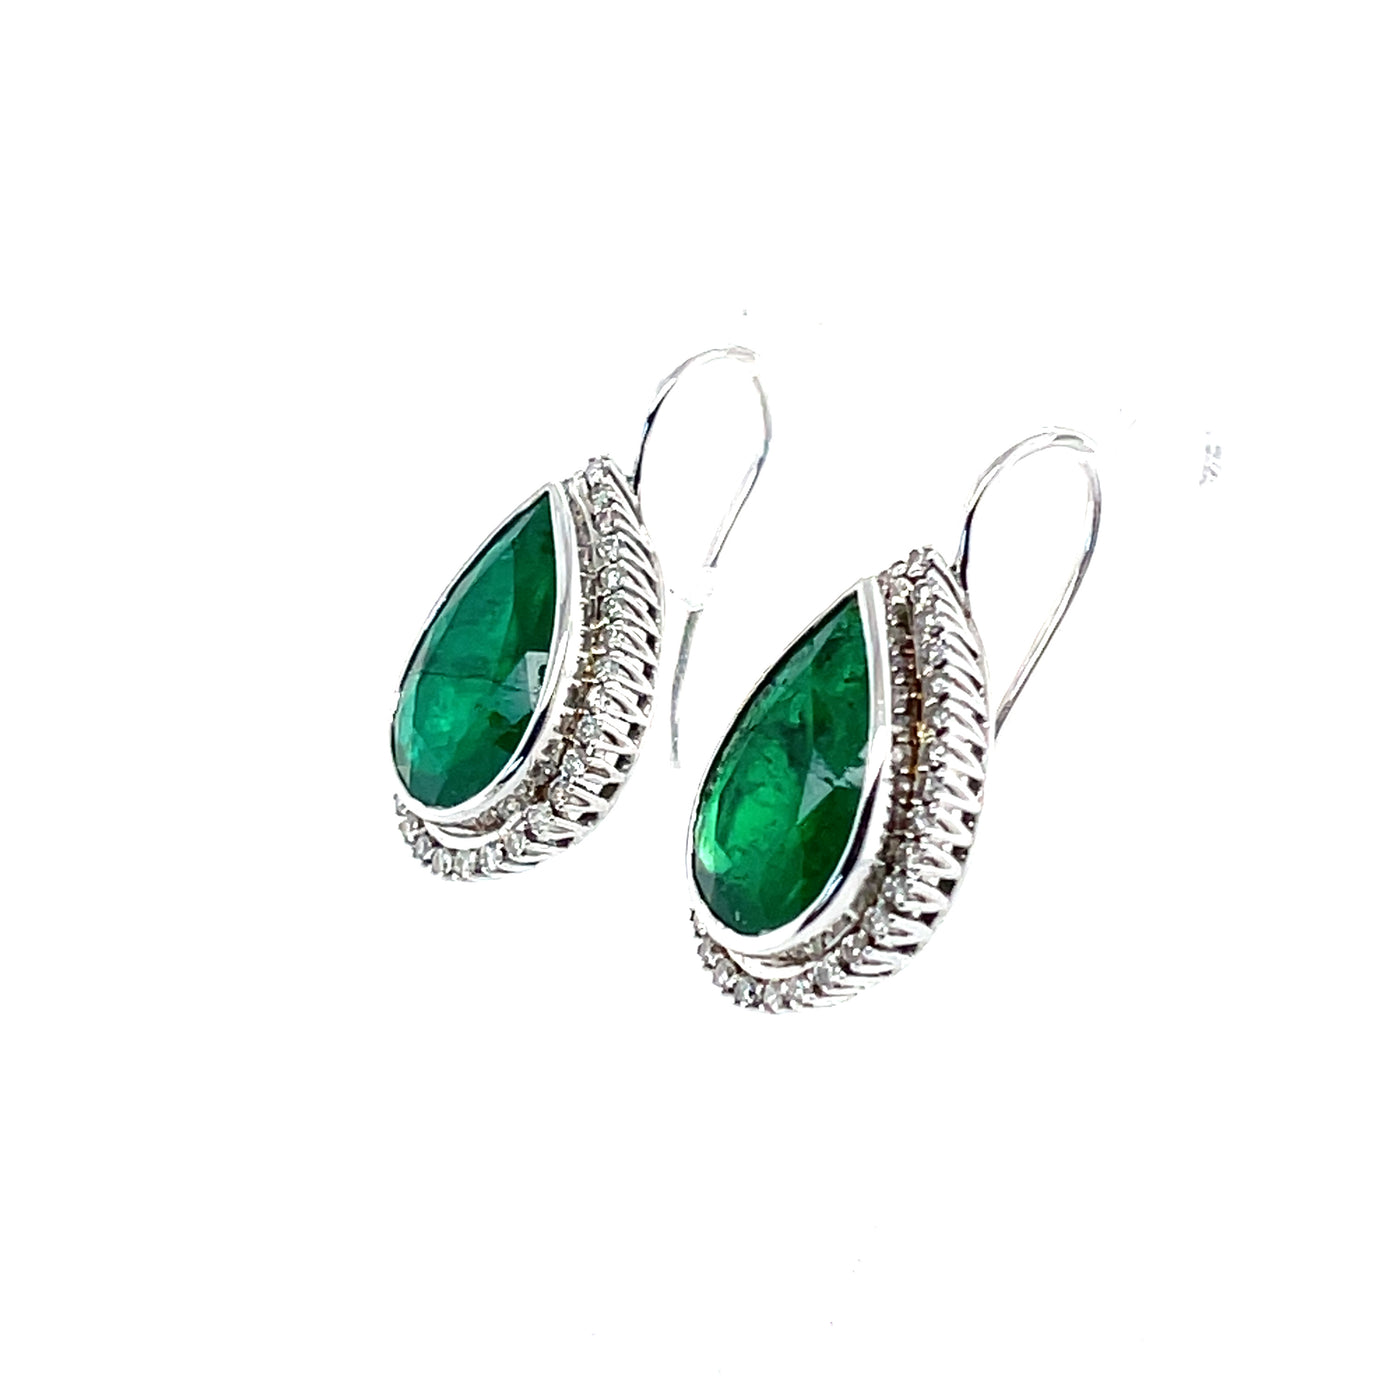 18CT White Gold Emerald and Diamond Tear Drop Earrings